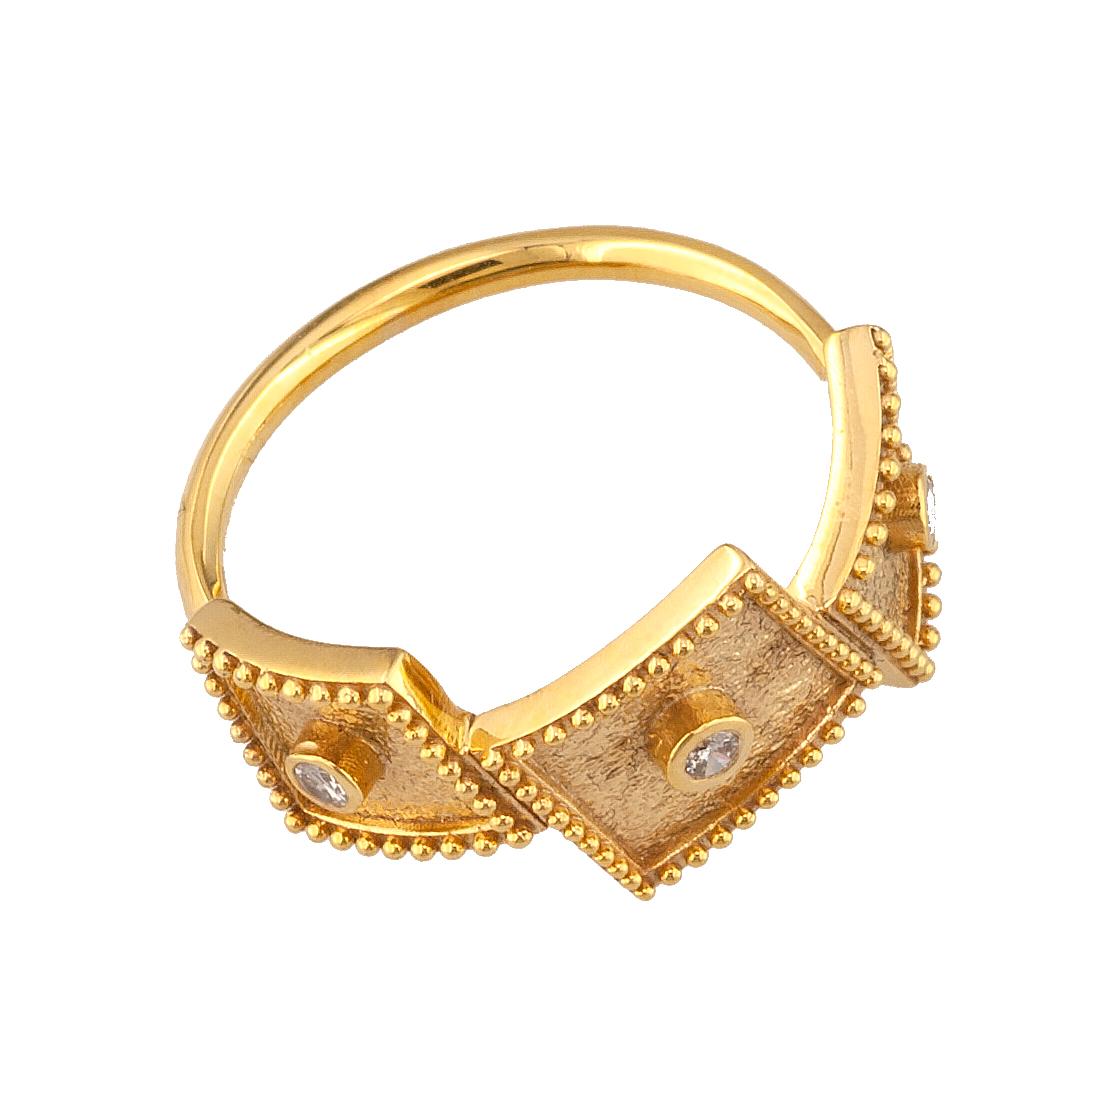 This S.Georgios designer thin band ring is 18 Karat yellow gold and microscopically decorated with hand-made granulation workmanship, and finished with a unique contrast velvet look. This beautiful thin band ring features 3 brilliant-cut White